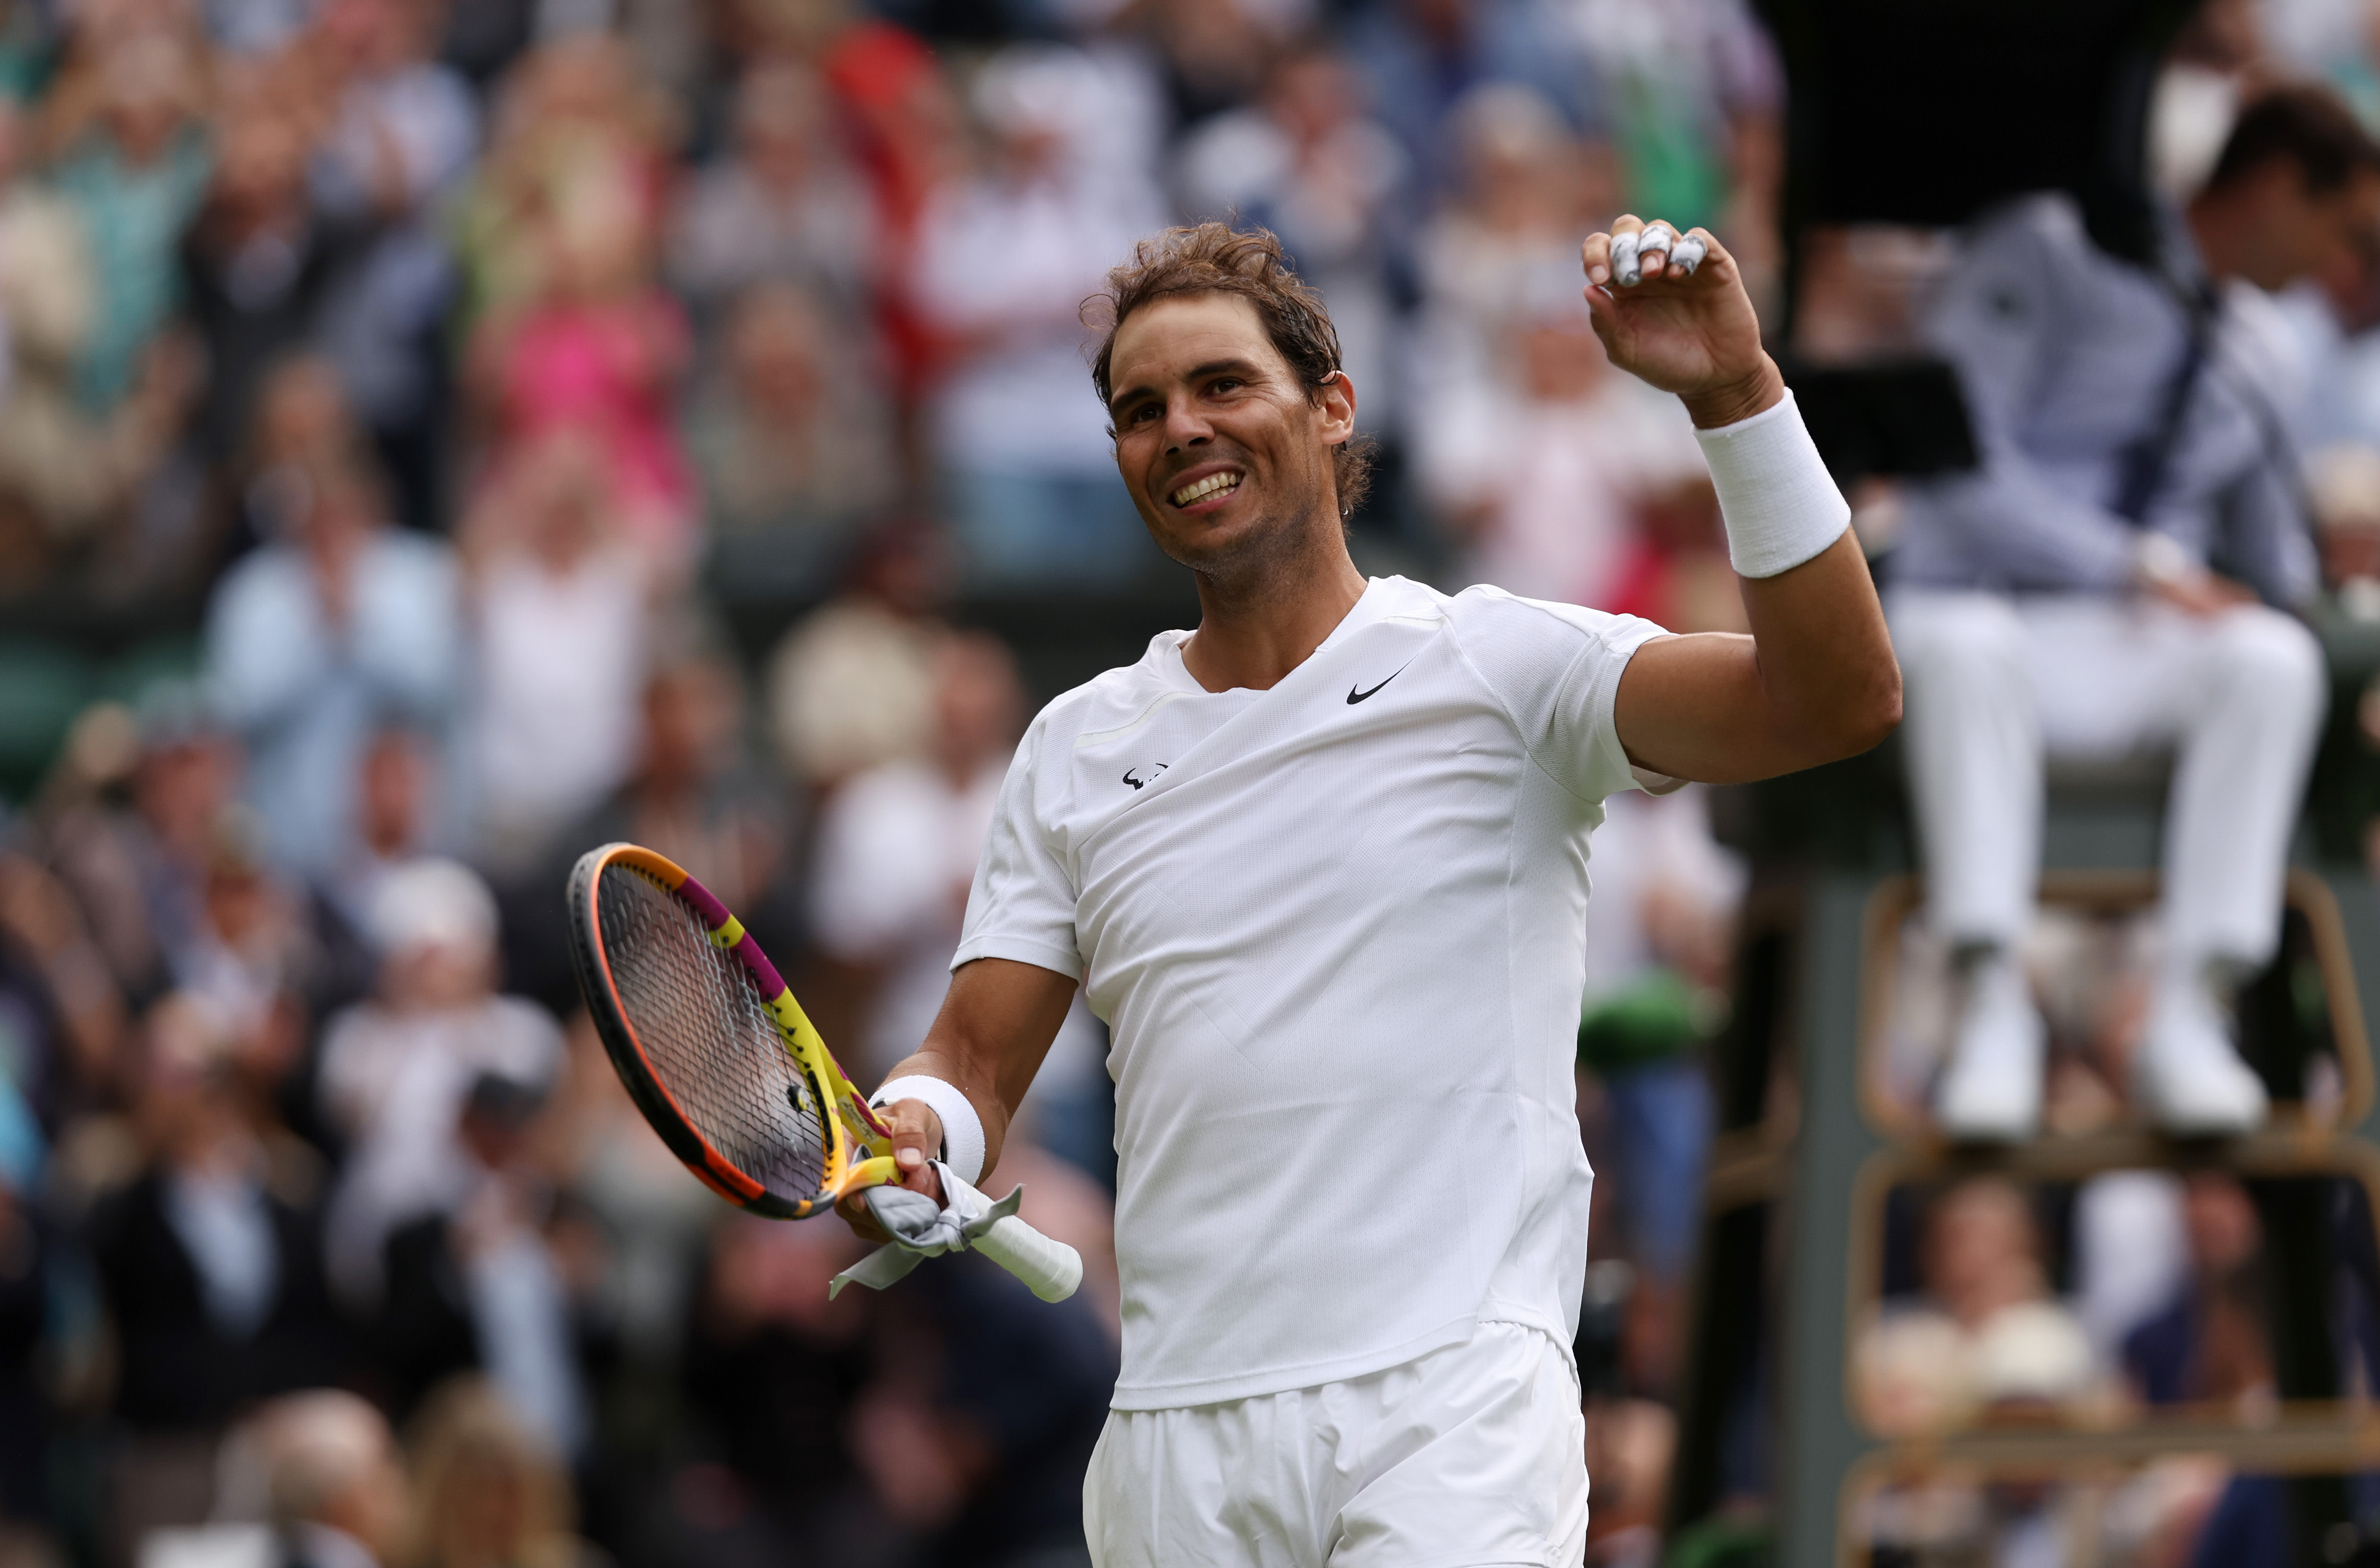 Rafael Nadal fends off late surge from Francisco Cerundolo, wins Wimbledon opener in four sets